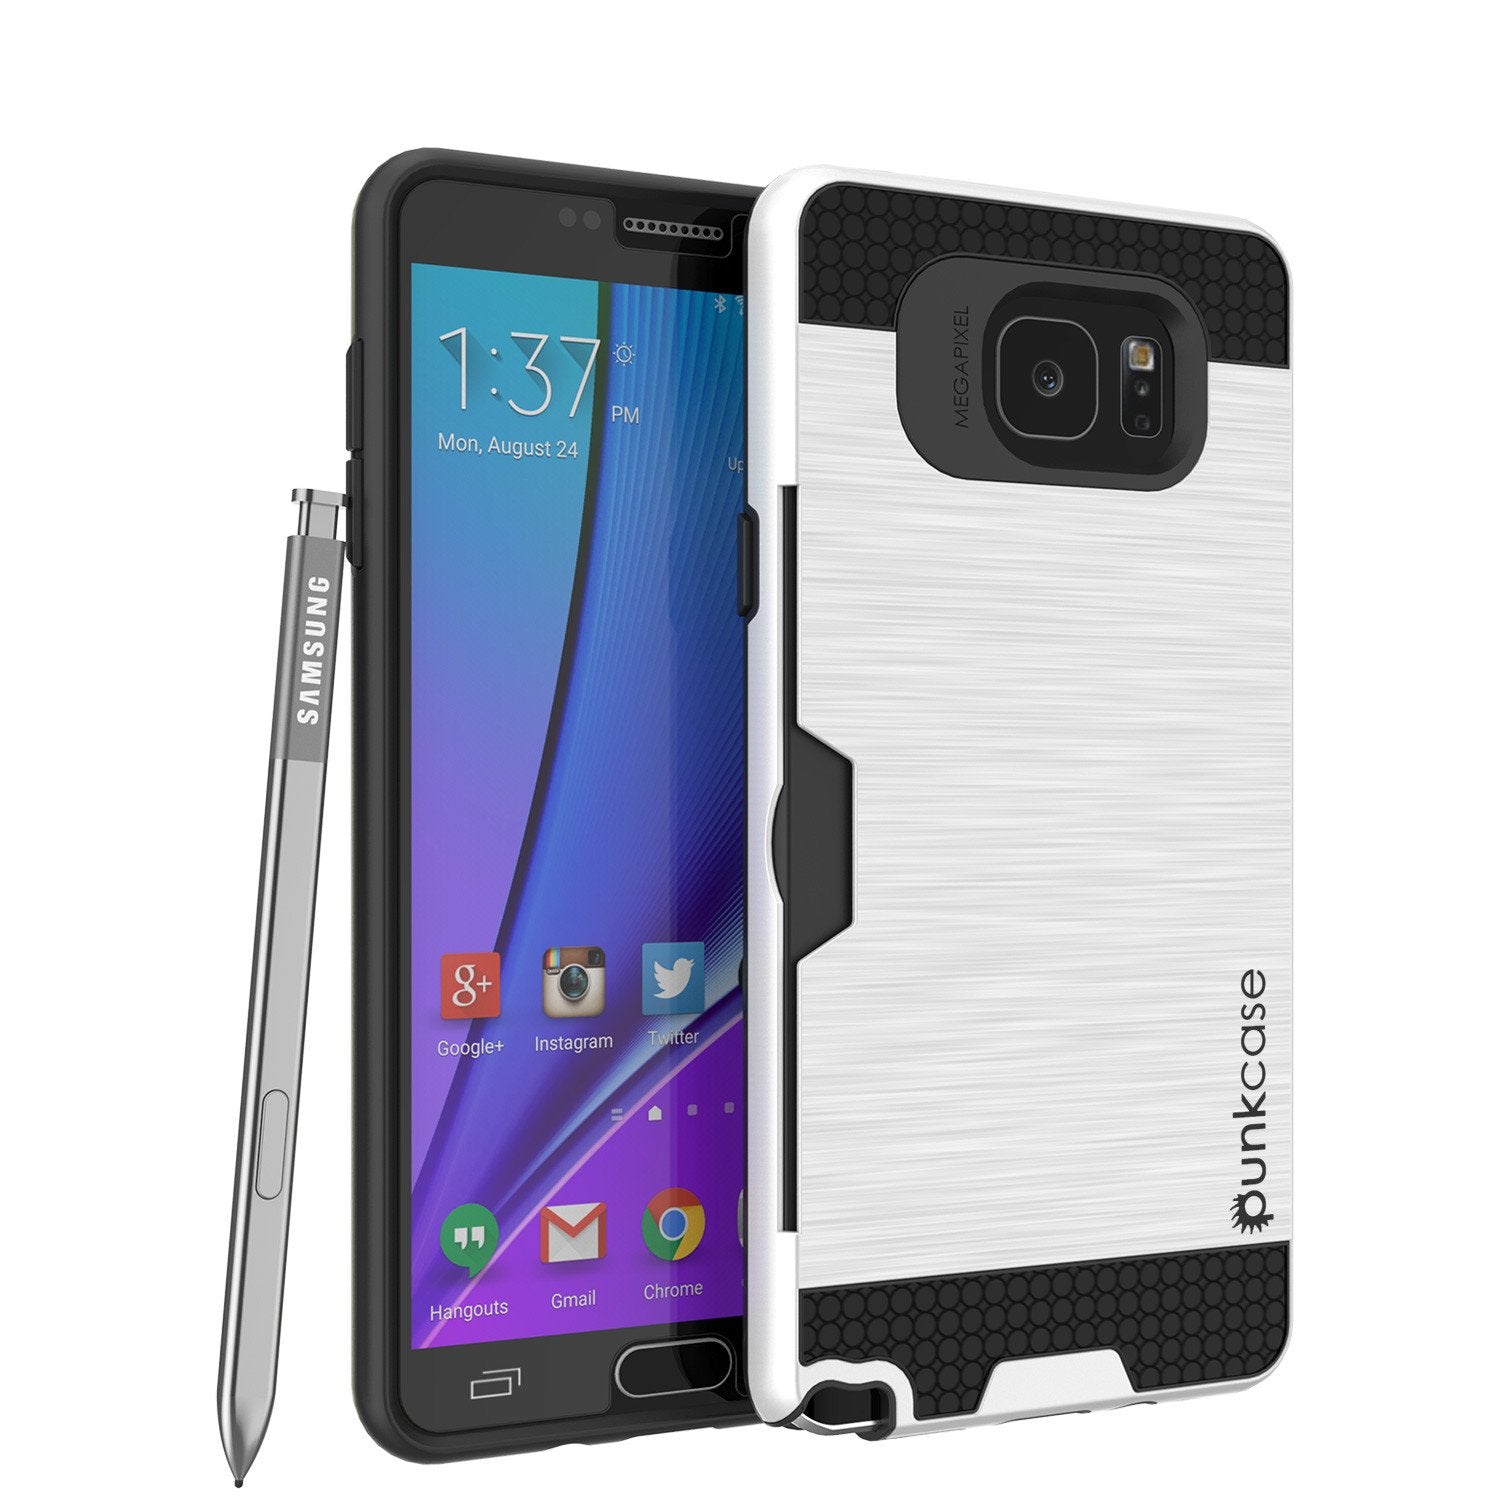 Galaxy Note 5 Case PunkCase SLOT White Series Slim Armor Soft Cover Case w/ Tempered Glass